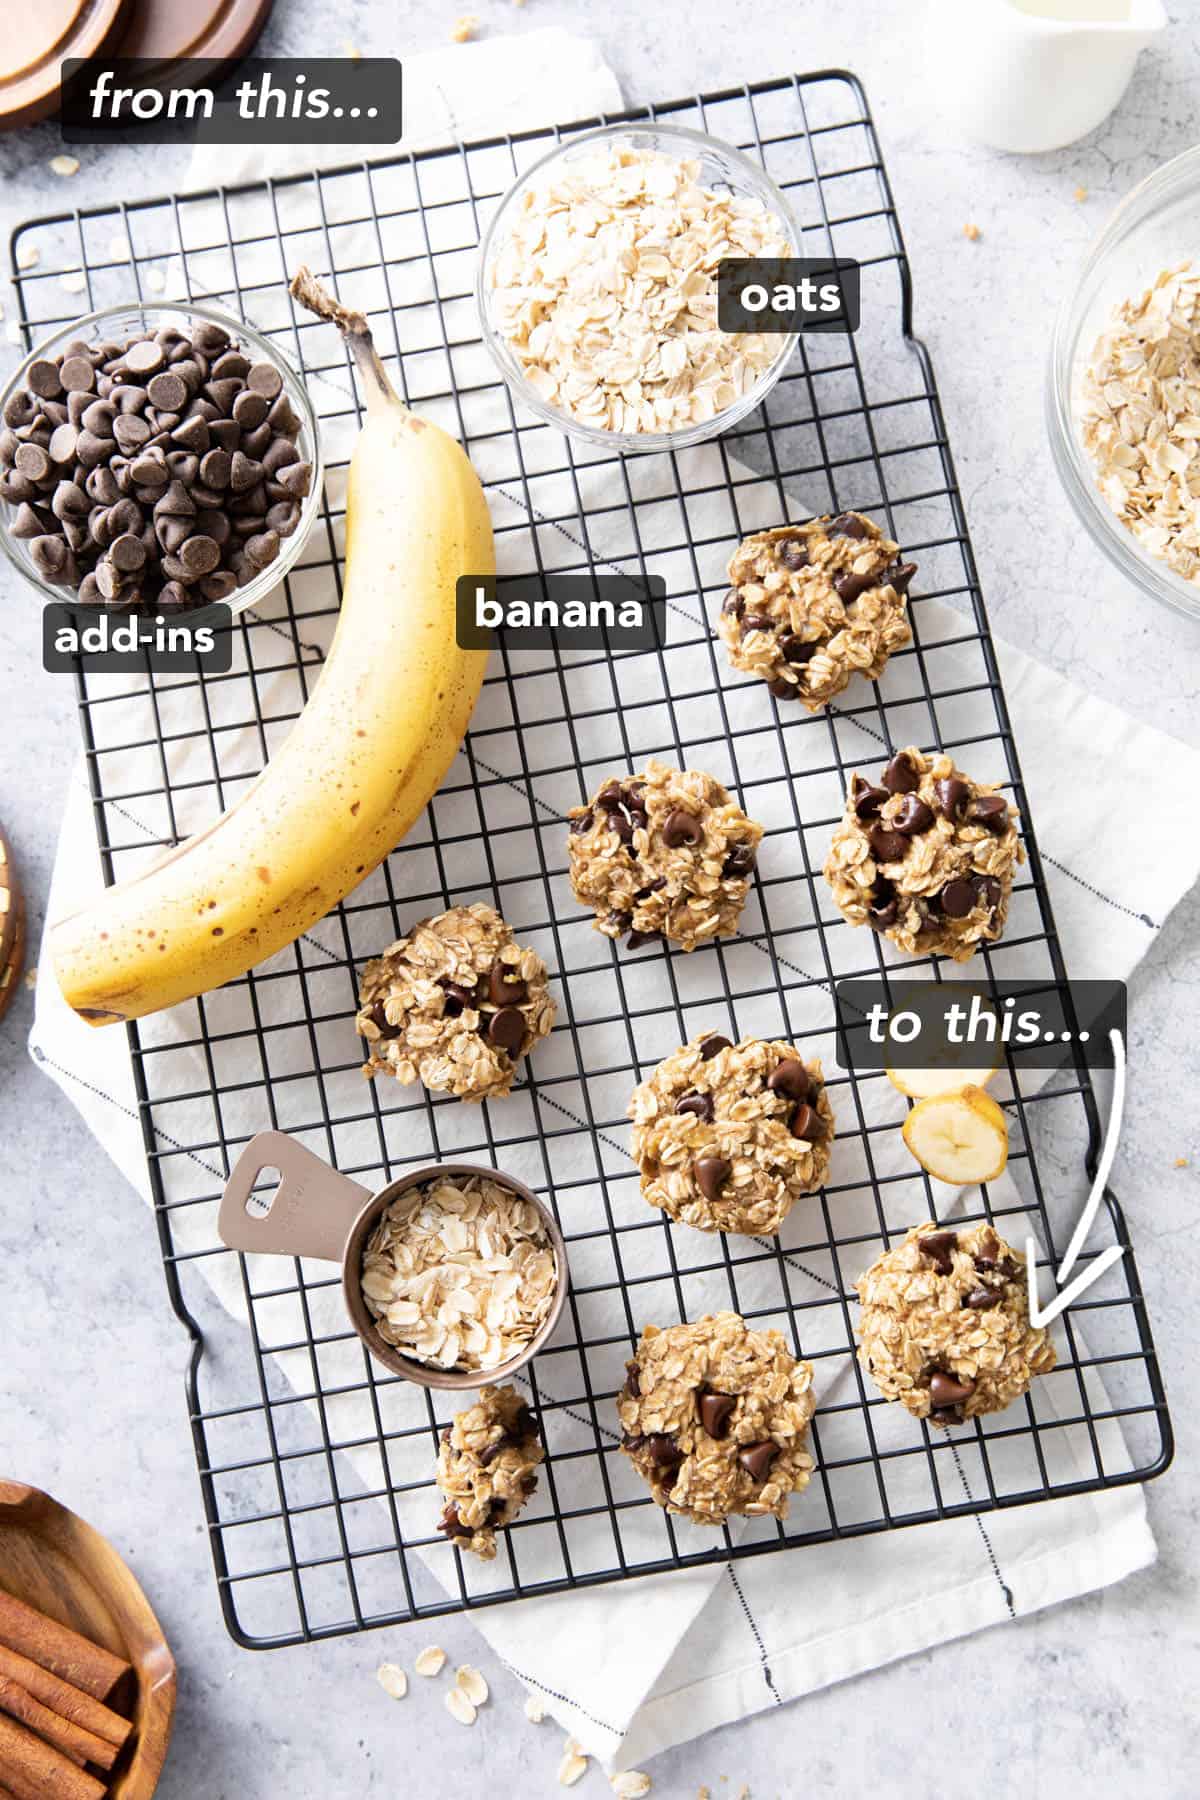 the 3 Ingredients for banana oatmeal cookies laid out on a table